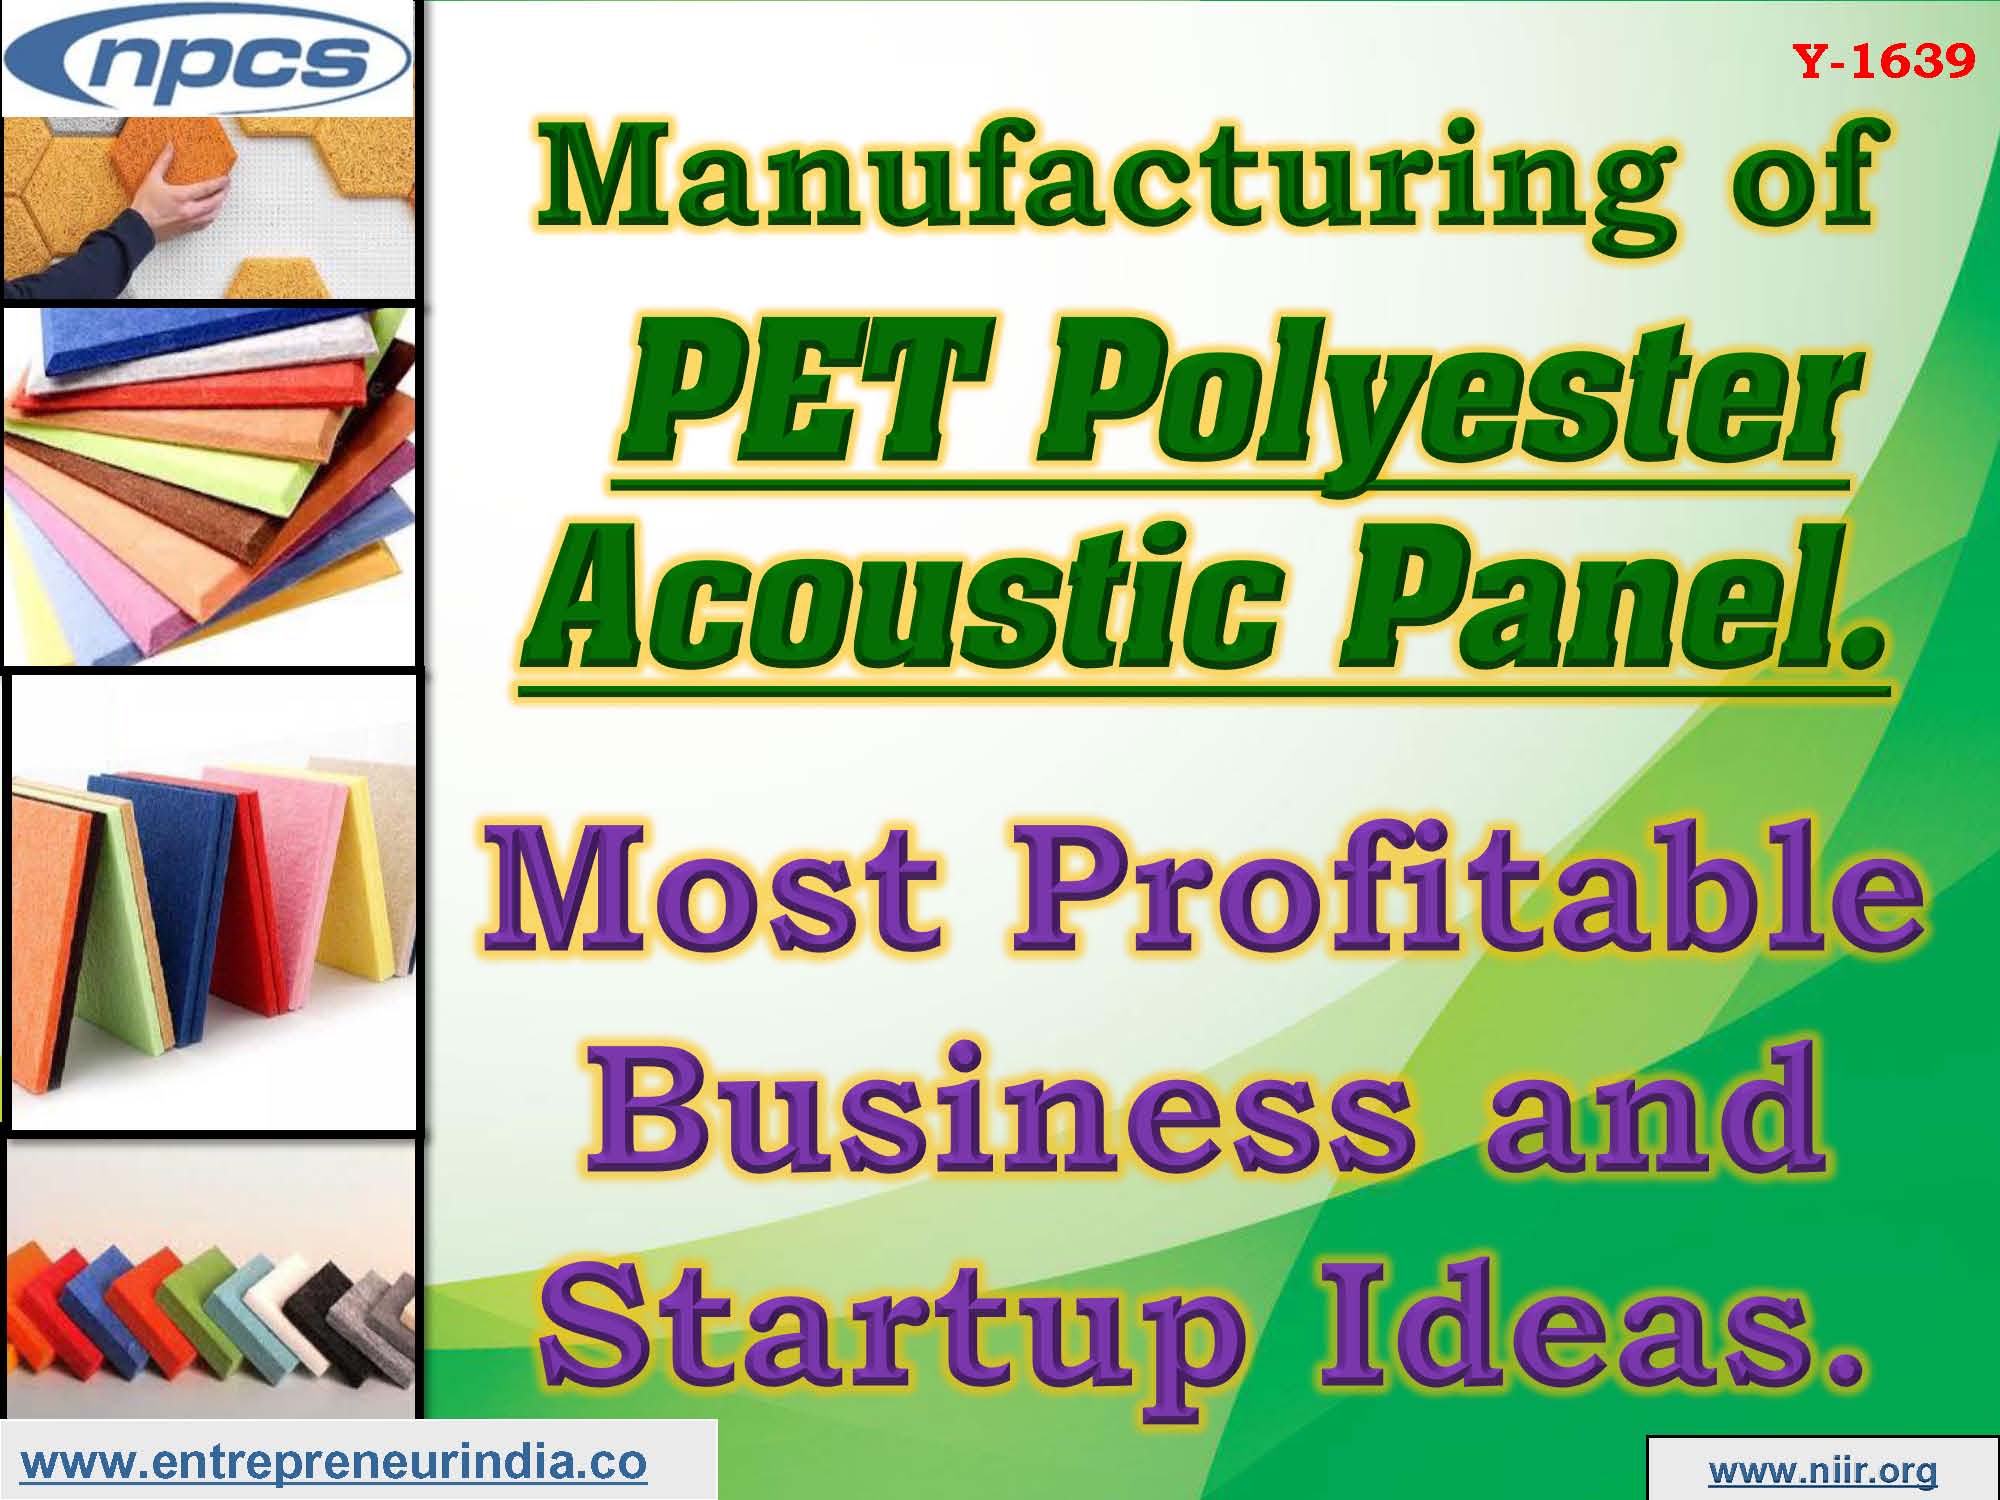 Manufacturing of PET Polyester Acoustic Panel